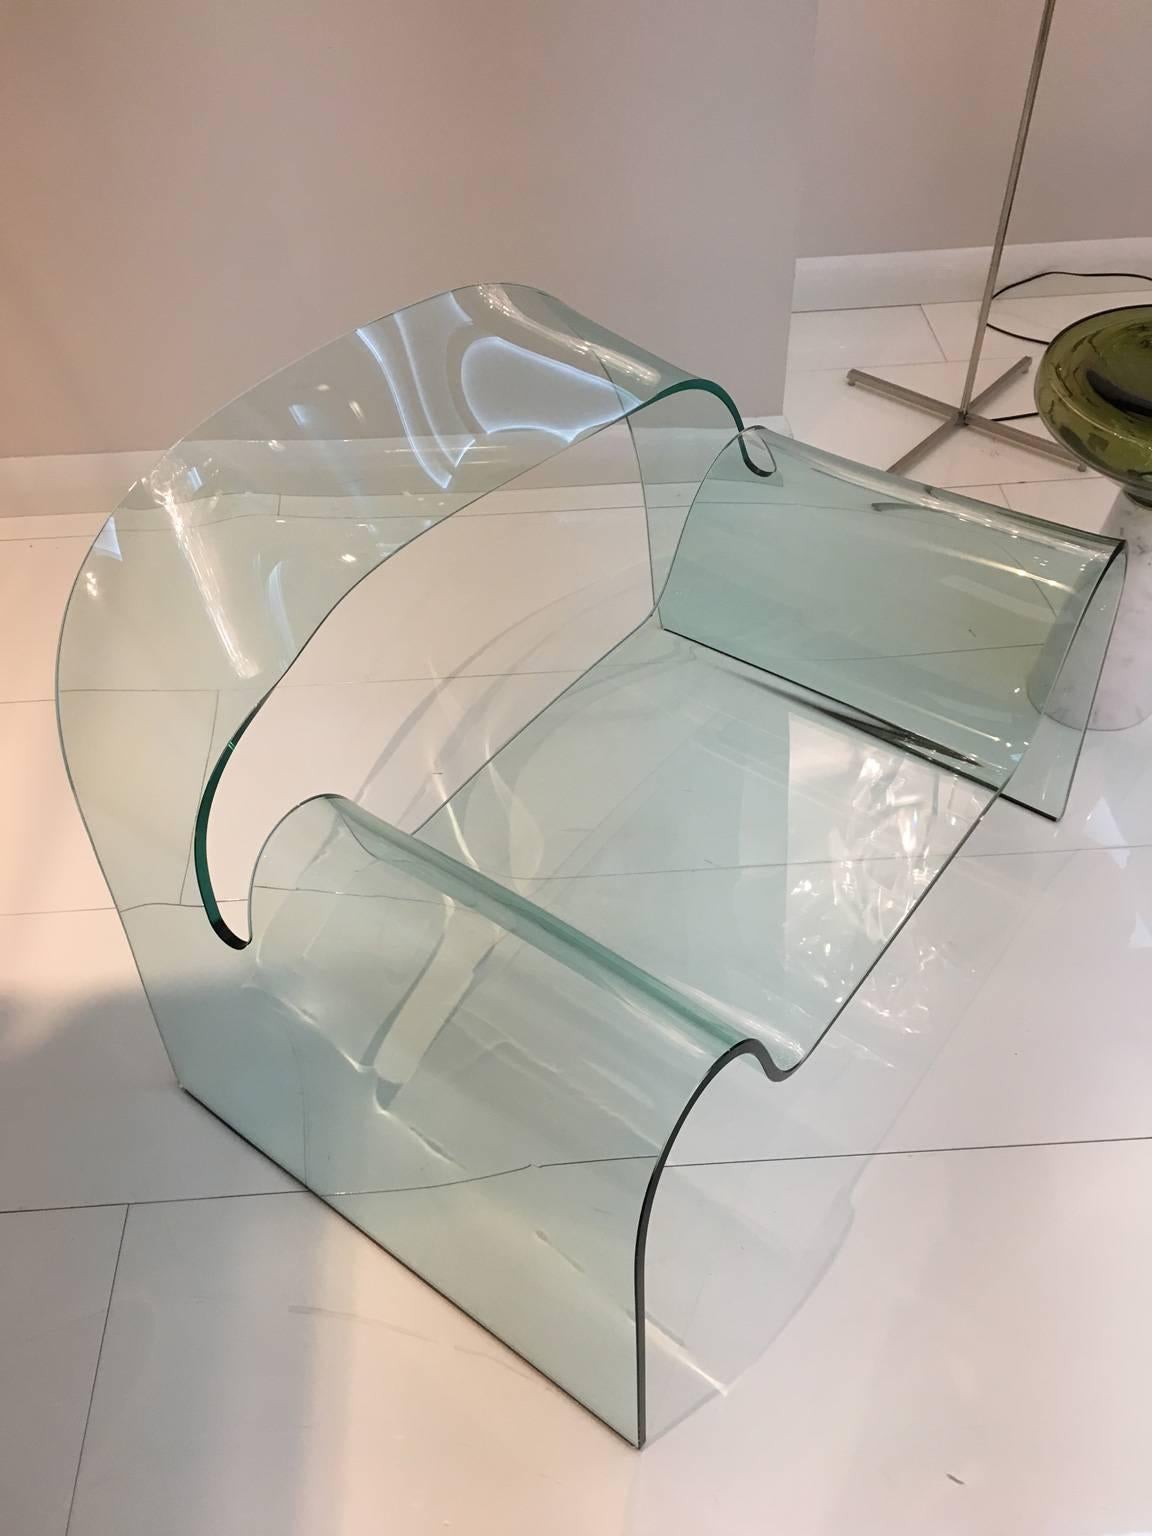 Ghost, the glass armchair, was born, shaped by the technical and aesthetic skill of Vittorio Livi, debuting at the Salone del Mobile in Milan in 1987, where it immediately received an award in a competition by the magazine, “Interni”, which invited